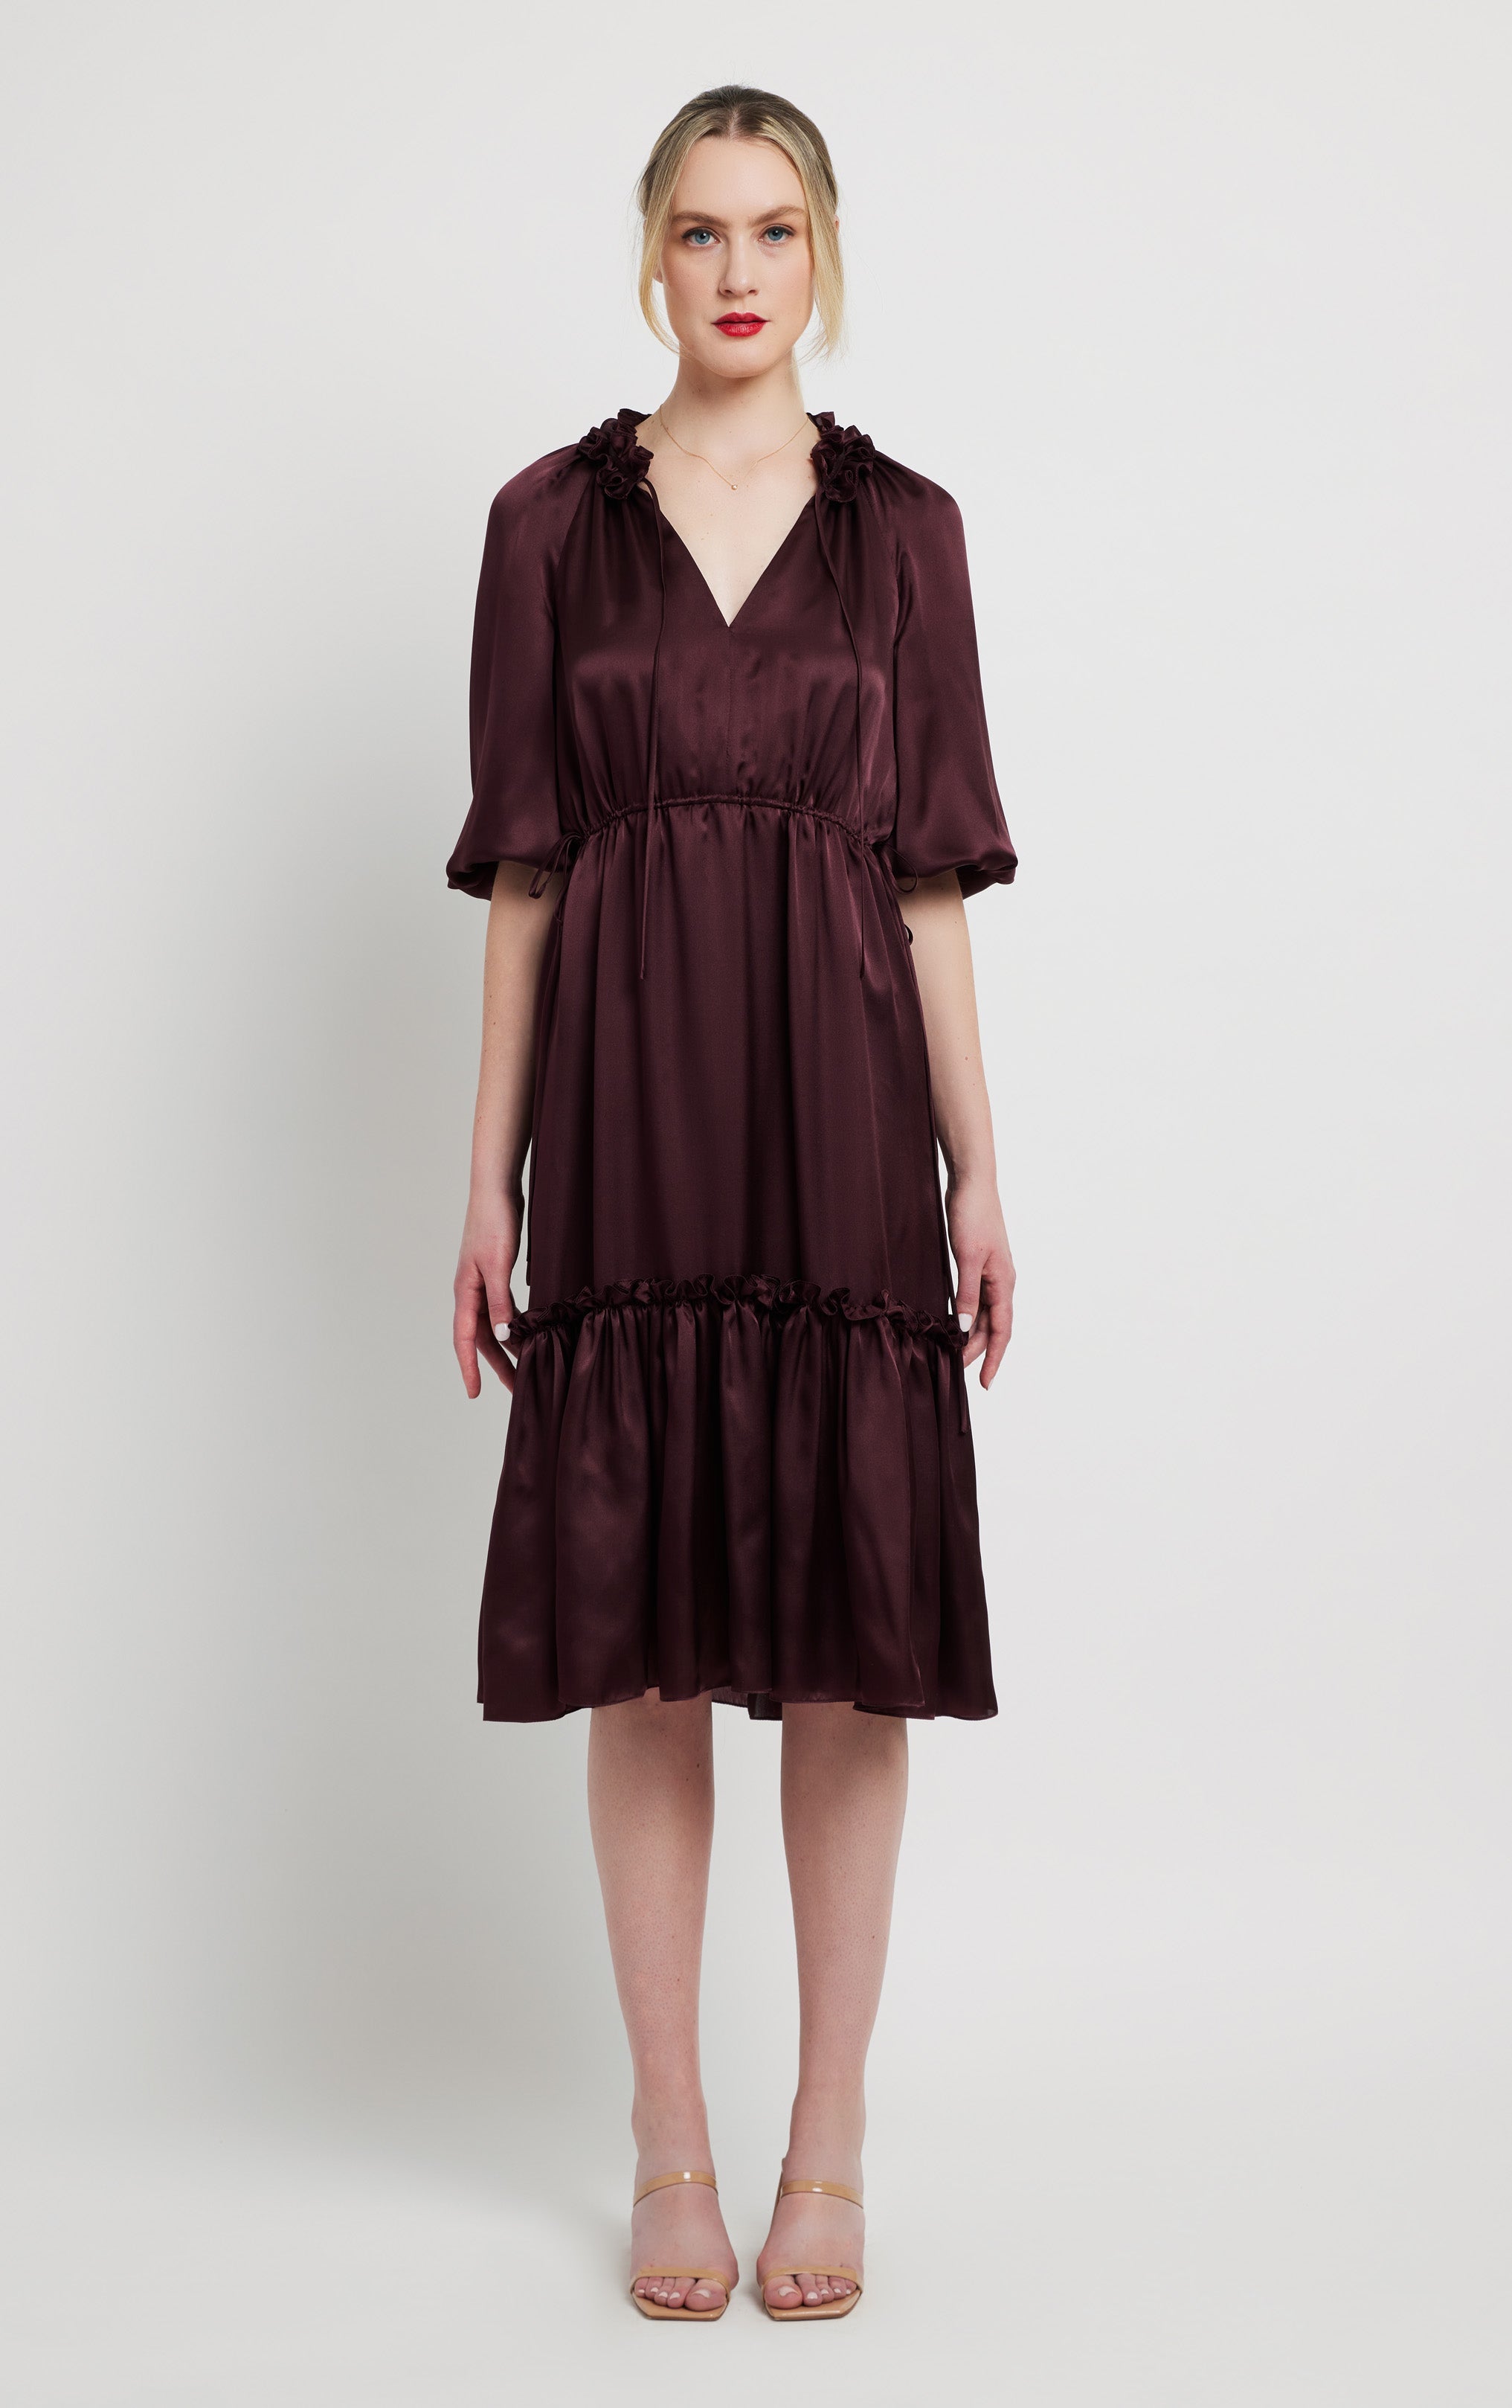 woman standing wearing burgundy silk dress with invisible zipper ruffled neck and puffed sleeves